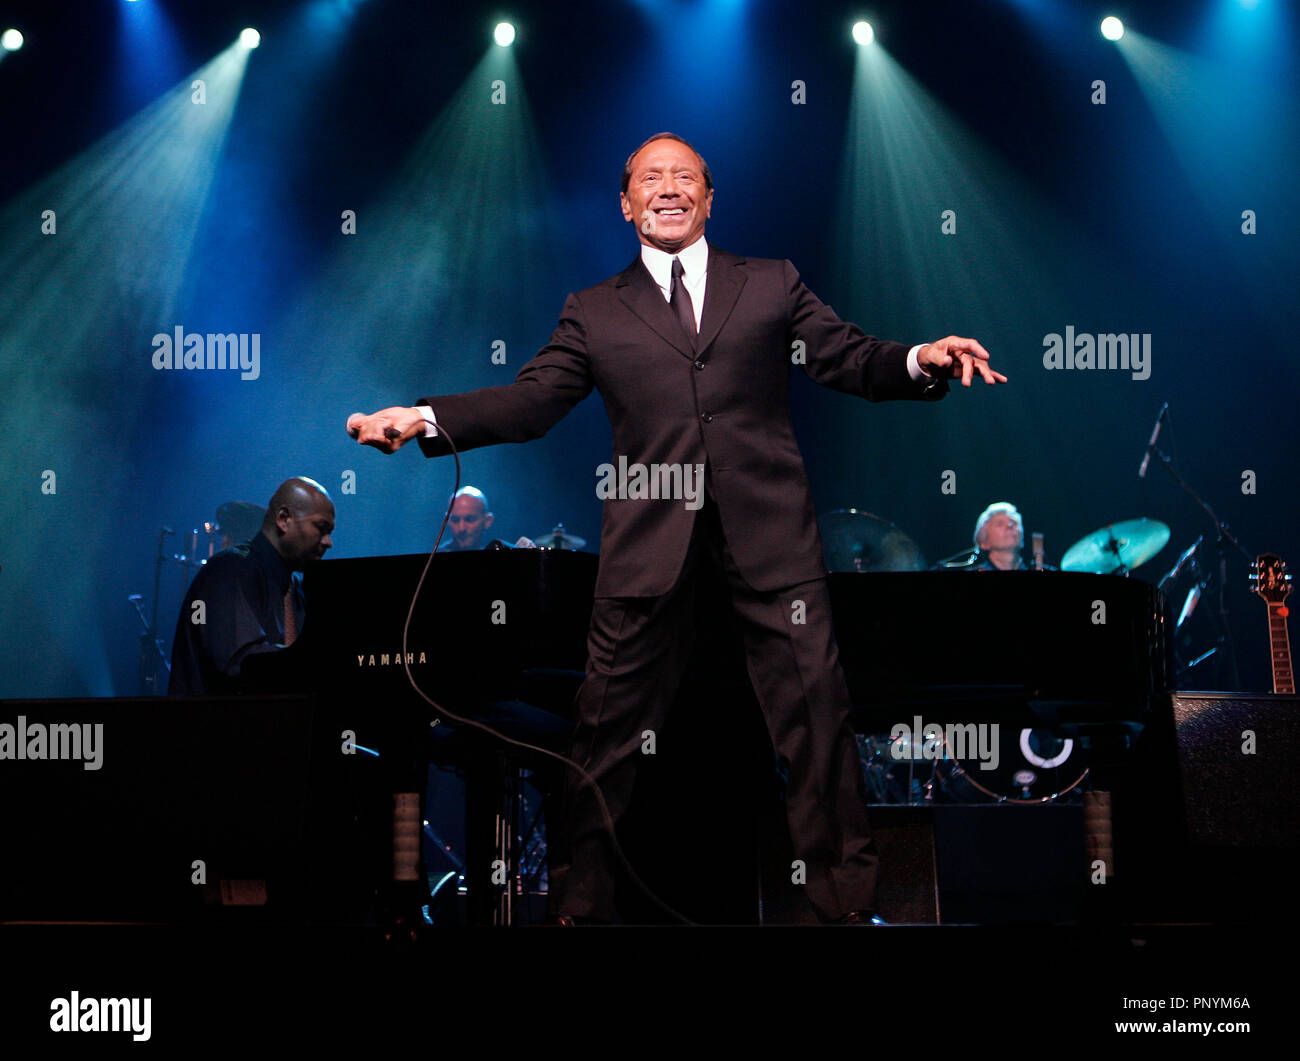 Paul Anka performs in concert at the Seminole Hard Rock Hotel and Casino in Hollywood, Florida on May 21, 2008. Stock Photo